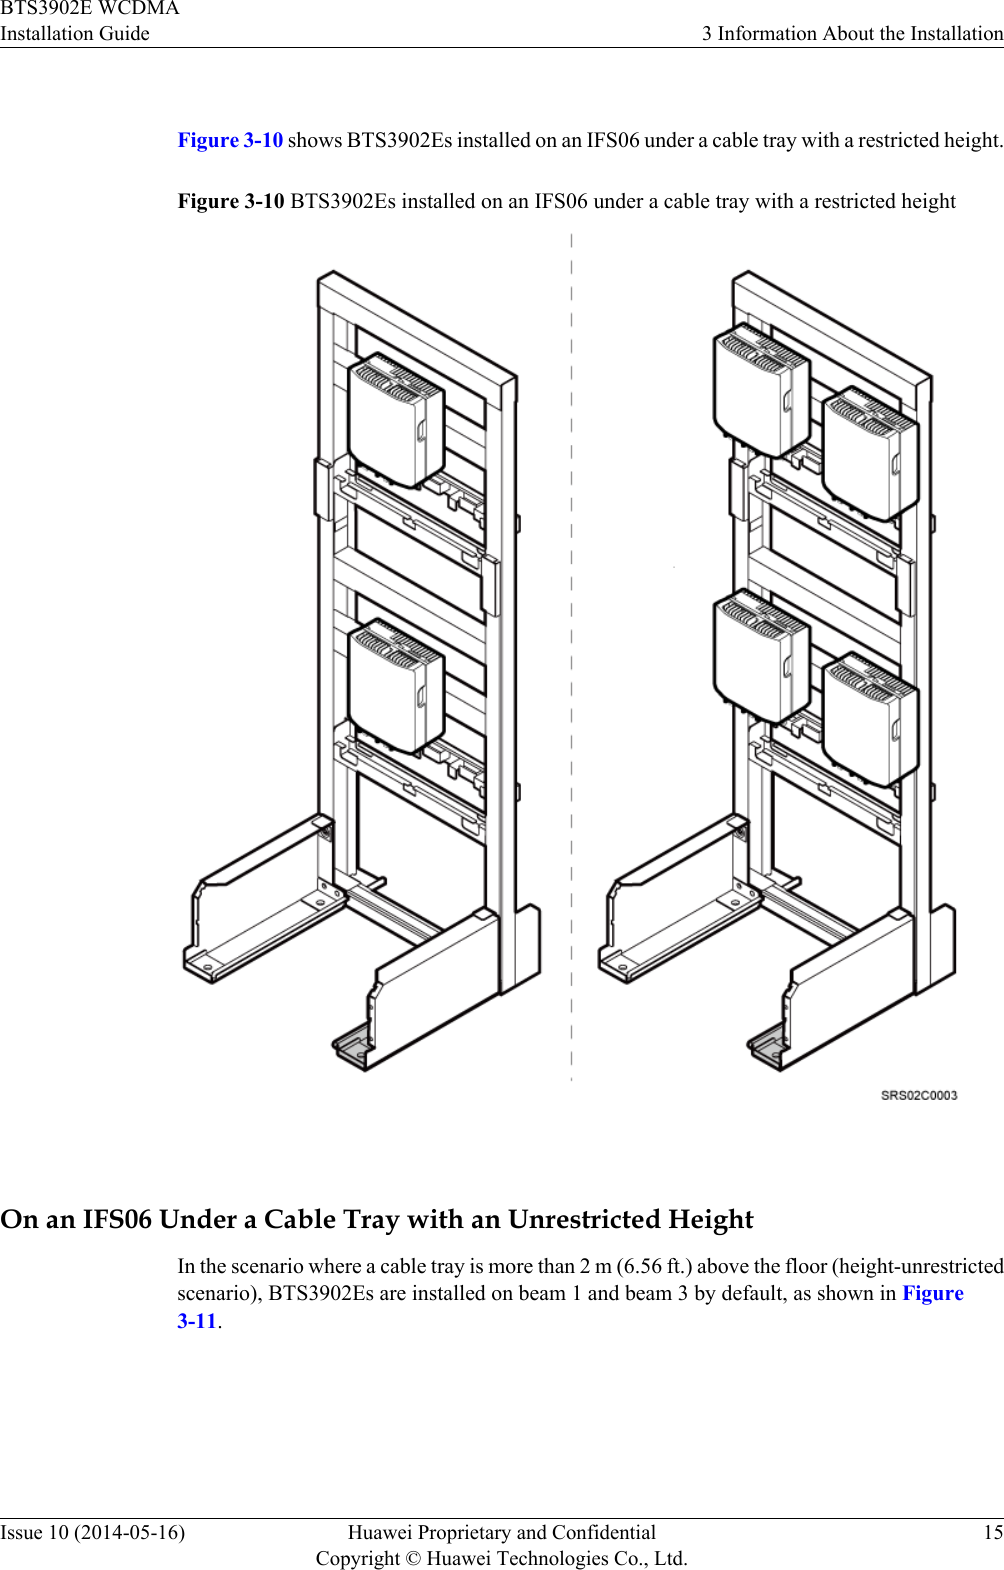  Figure 3-10 shows BTS3902Es installed on an IFS06 under a cable tray with a restricted height.Figure 3-10 BTS3902Es installed on an IFS06 under a cable tray with a restricted height On an IFS06 Under a Cable Tray with an Unrestricted HeightIn the scenario where a cable tray is more than 2 m (6.56 ft.) above the floor (height-unrestrictedscenario), BTS3902Es are installed on beam 1 and beam 3 by default, as shown in Figure3-11.BTS3902E WCDMAInstallation Guide 3 Information About the InstallationIssue 10 (2014-05-16) Huawei Proprietary and ConfidentialCopyright © Huawei Technologies Co., Ltd.15